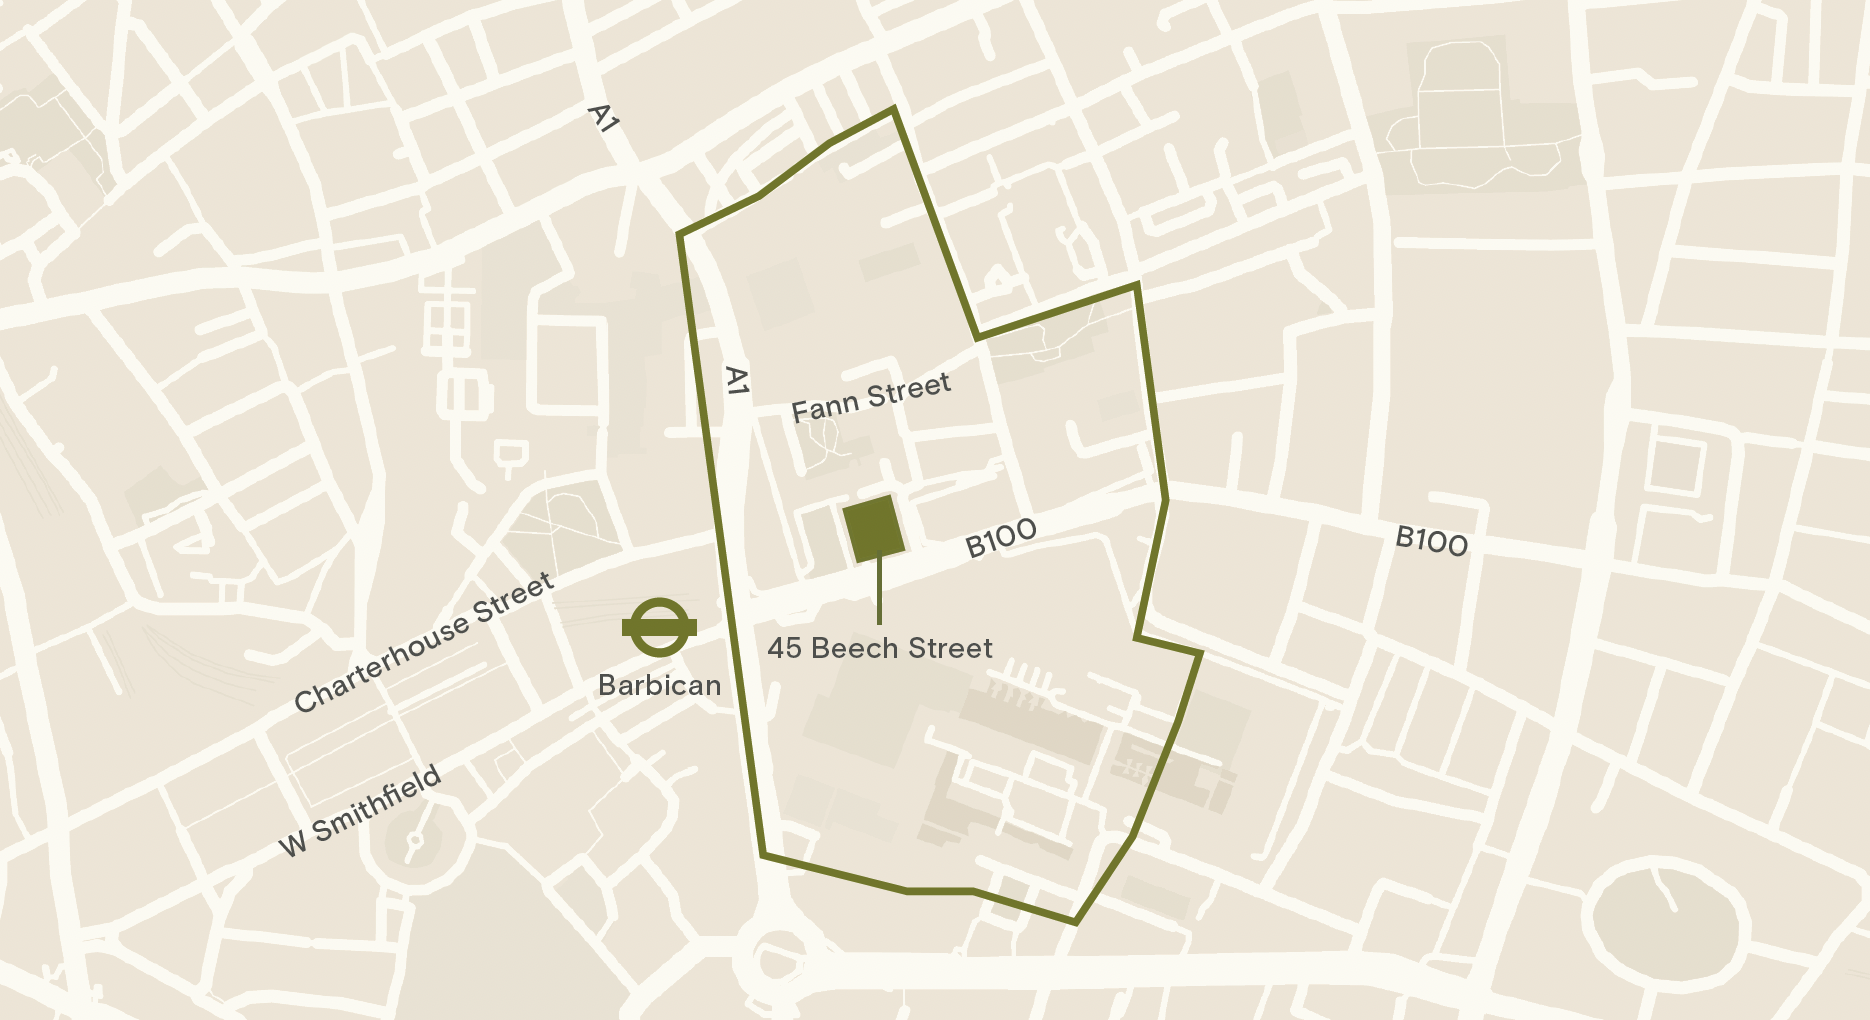 Map outlining the site location on Beech Street